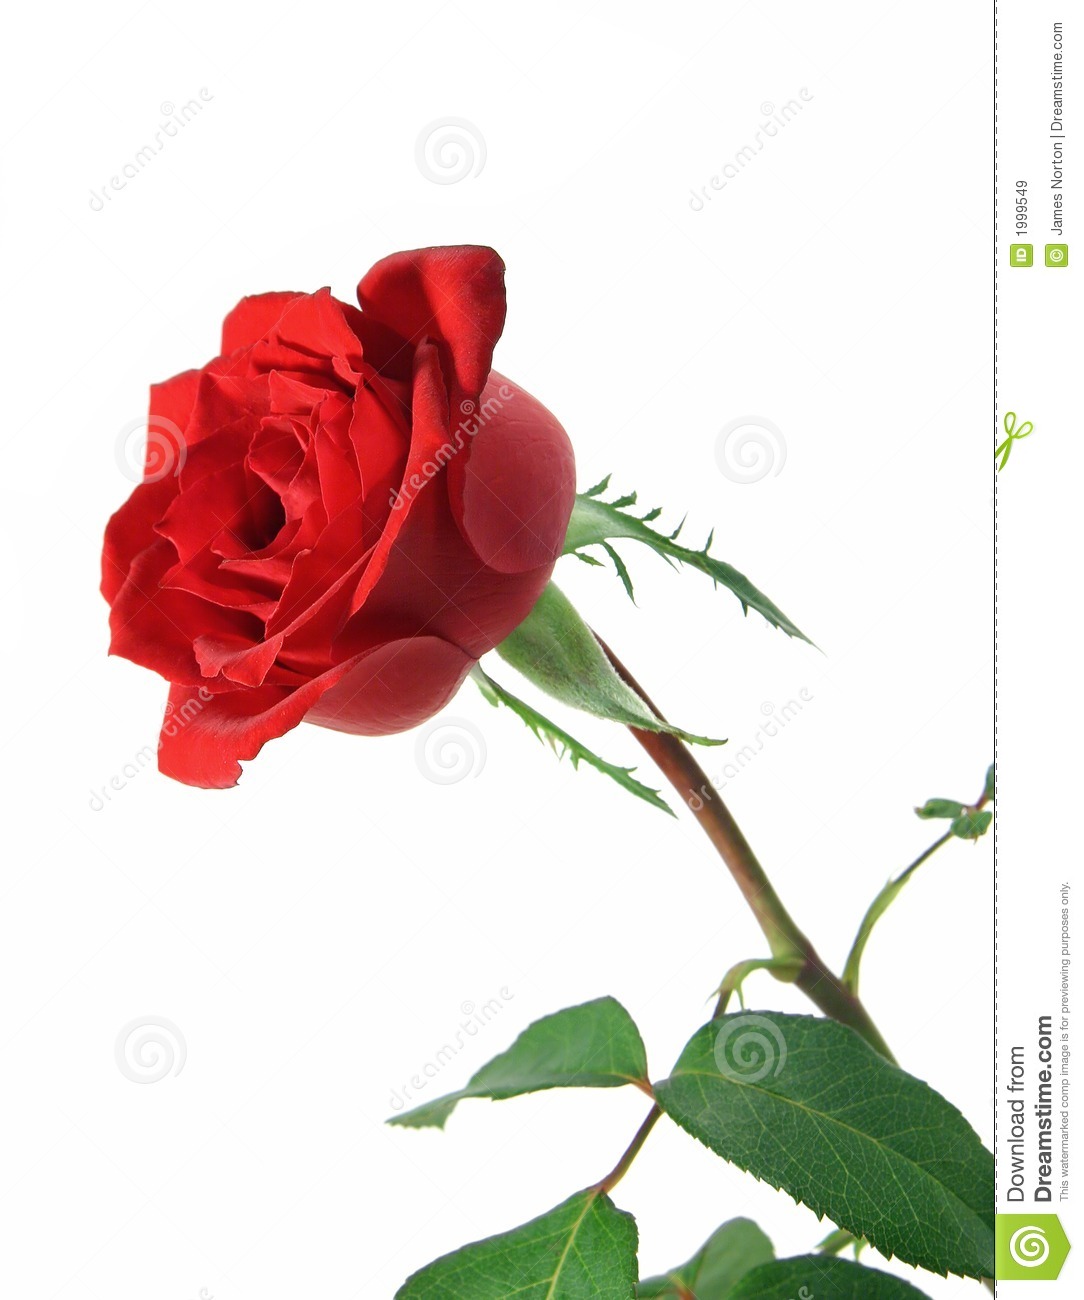 Single Long Stem Rose Isolated On A White Background With Some Of The